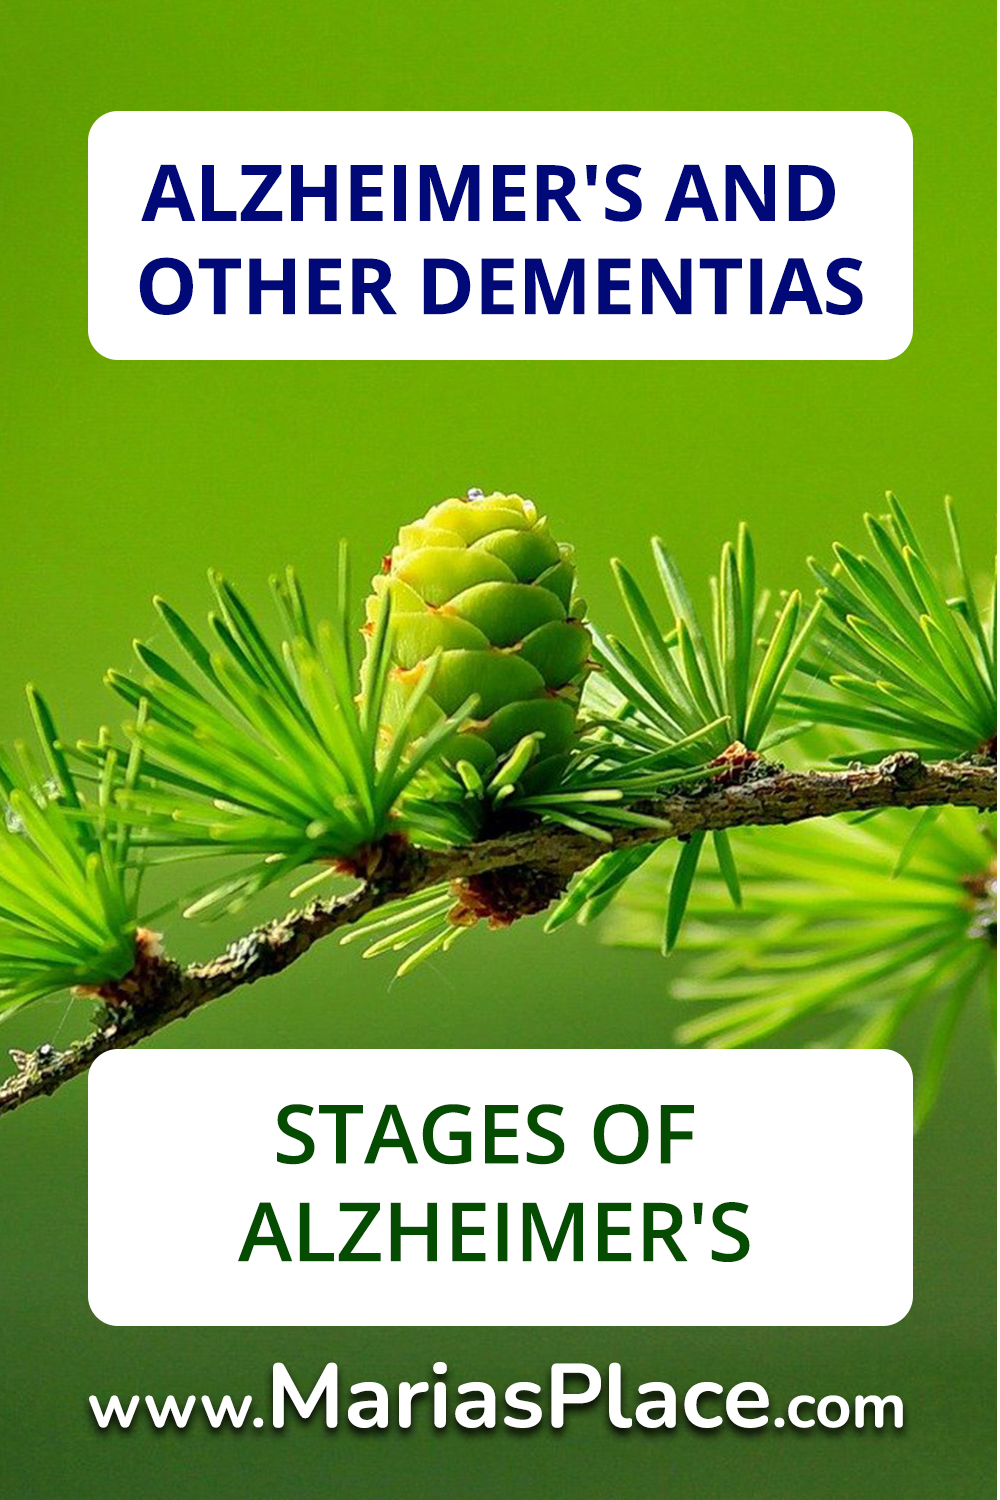 Stages of Alzheimer’s